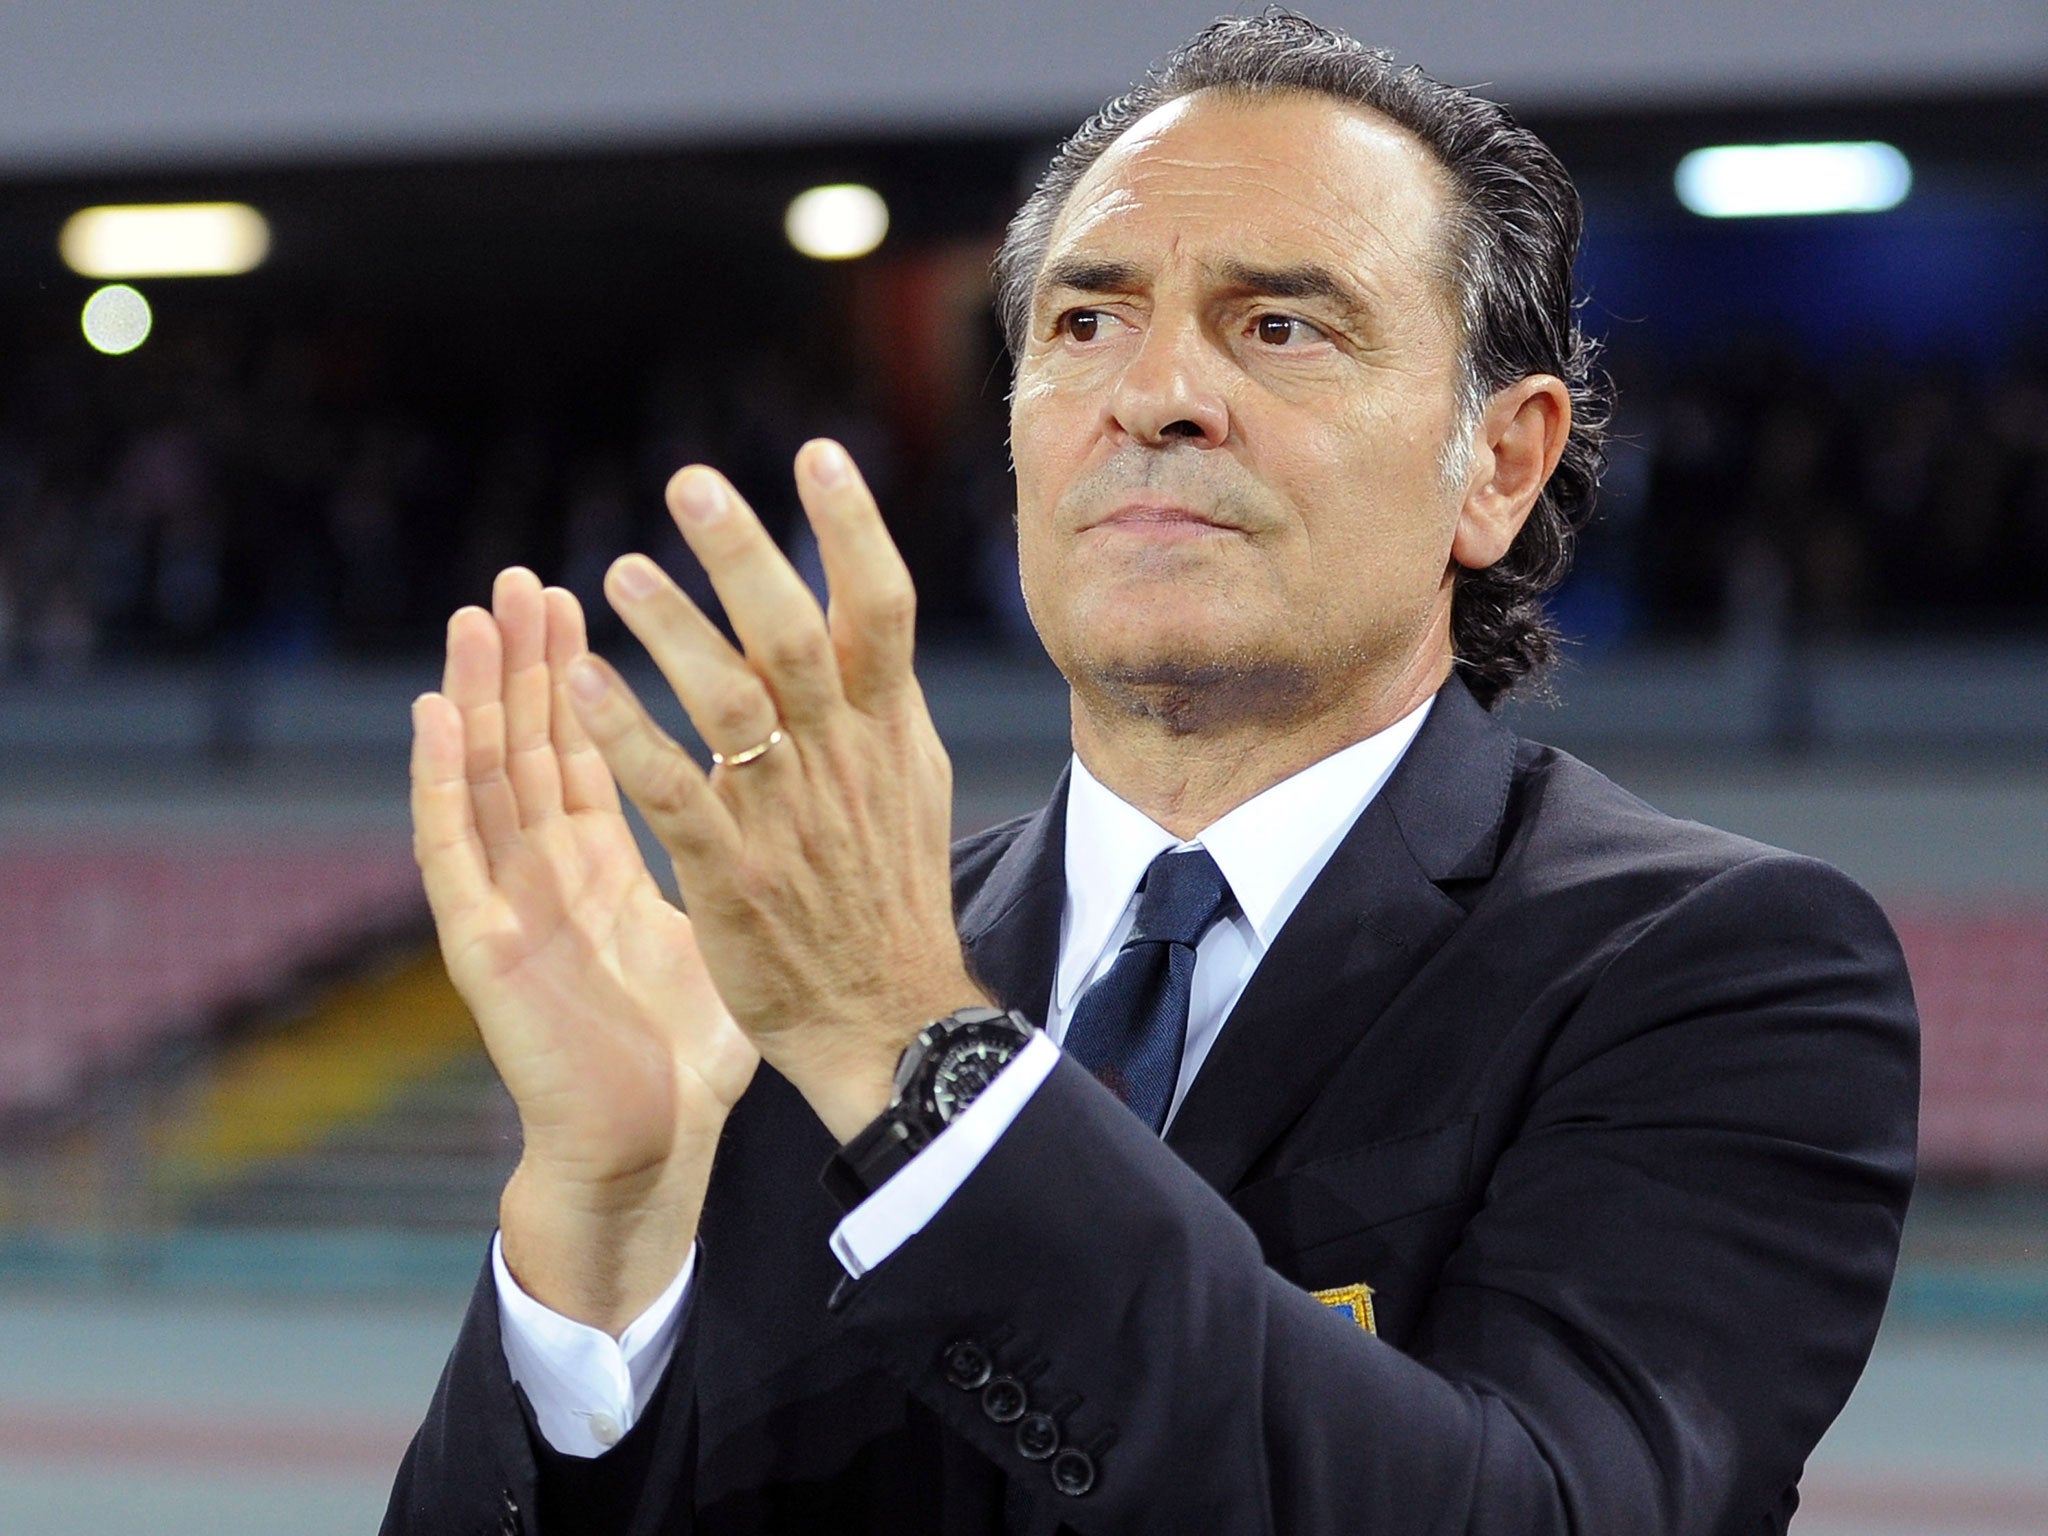 Italy manager Cesare Prandelli has been linked with a move to Tottenham to become manager after the 2014 World Cup